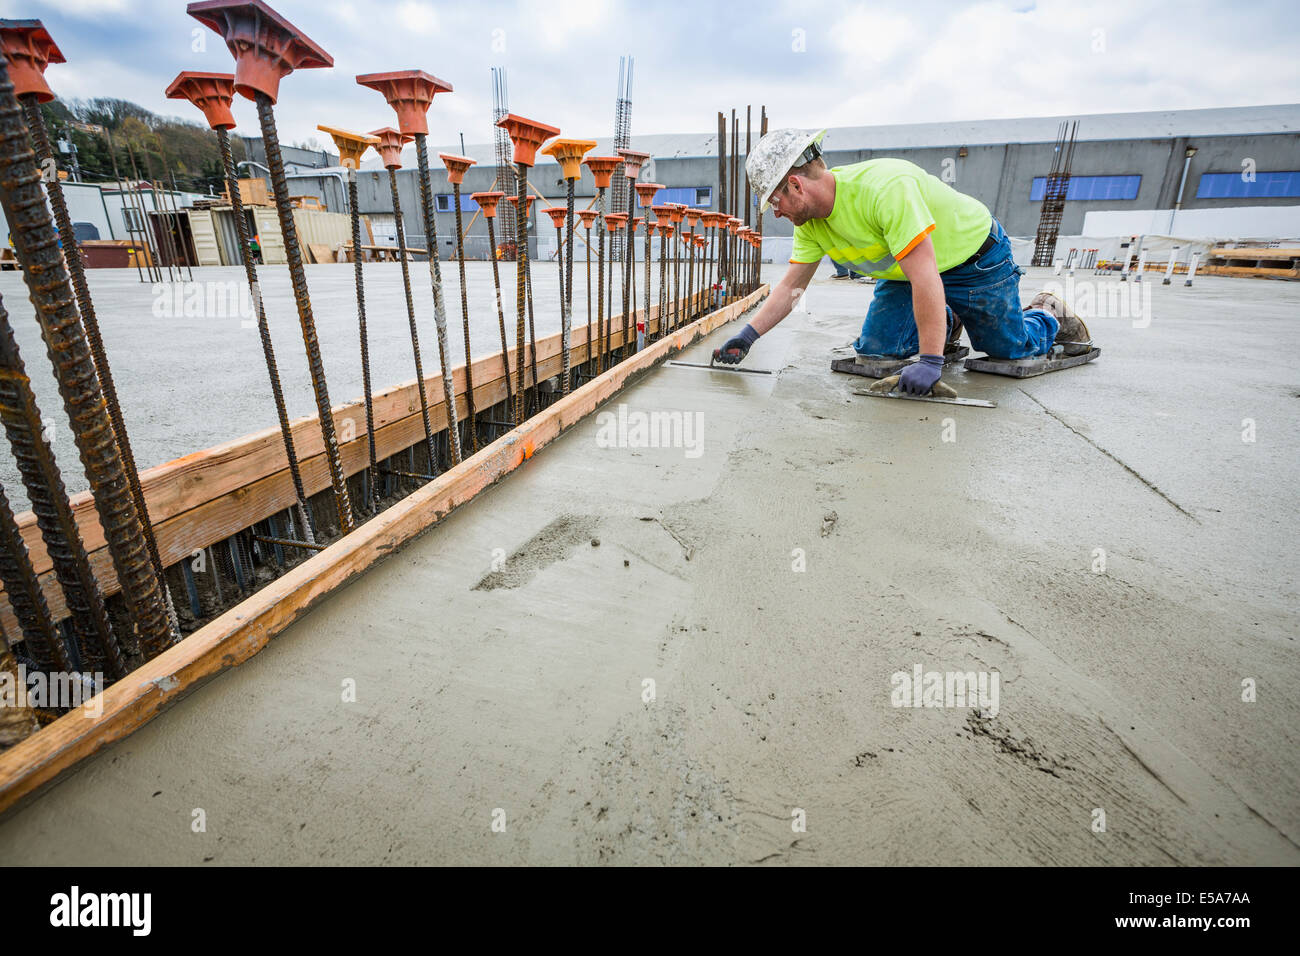 Worker finishing concrete at construction site Stock Photo